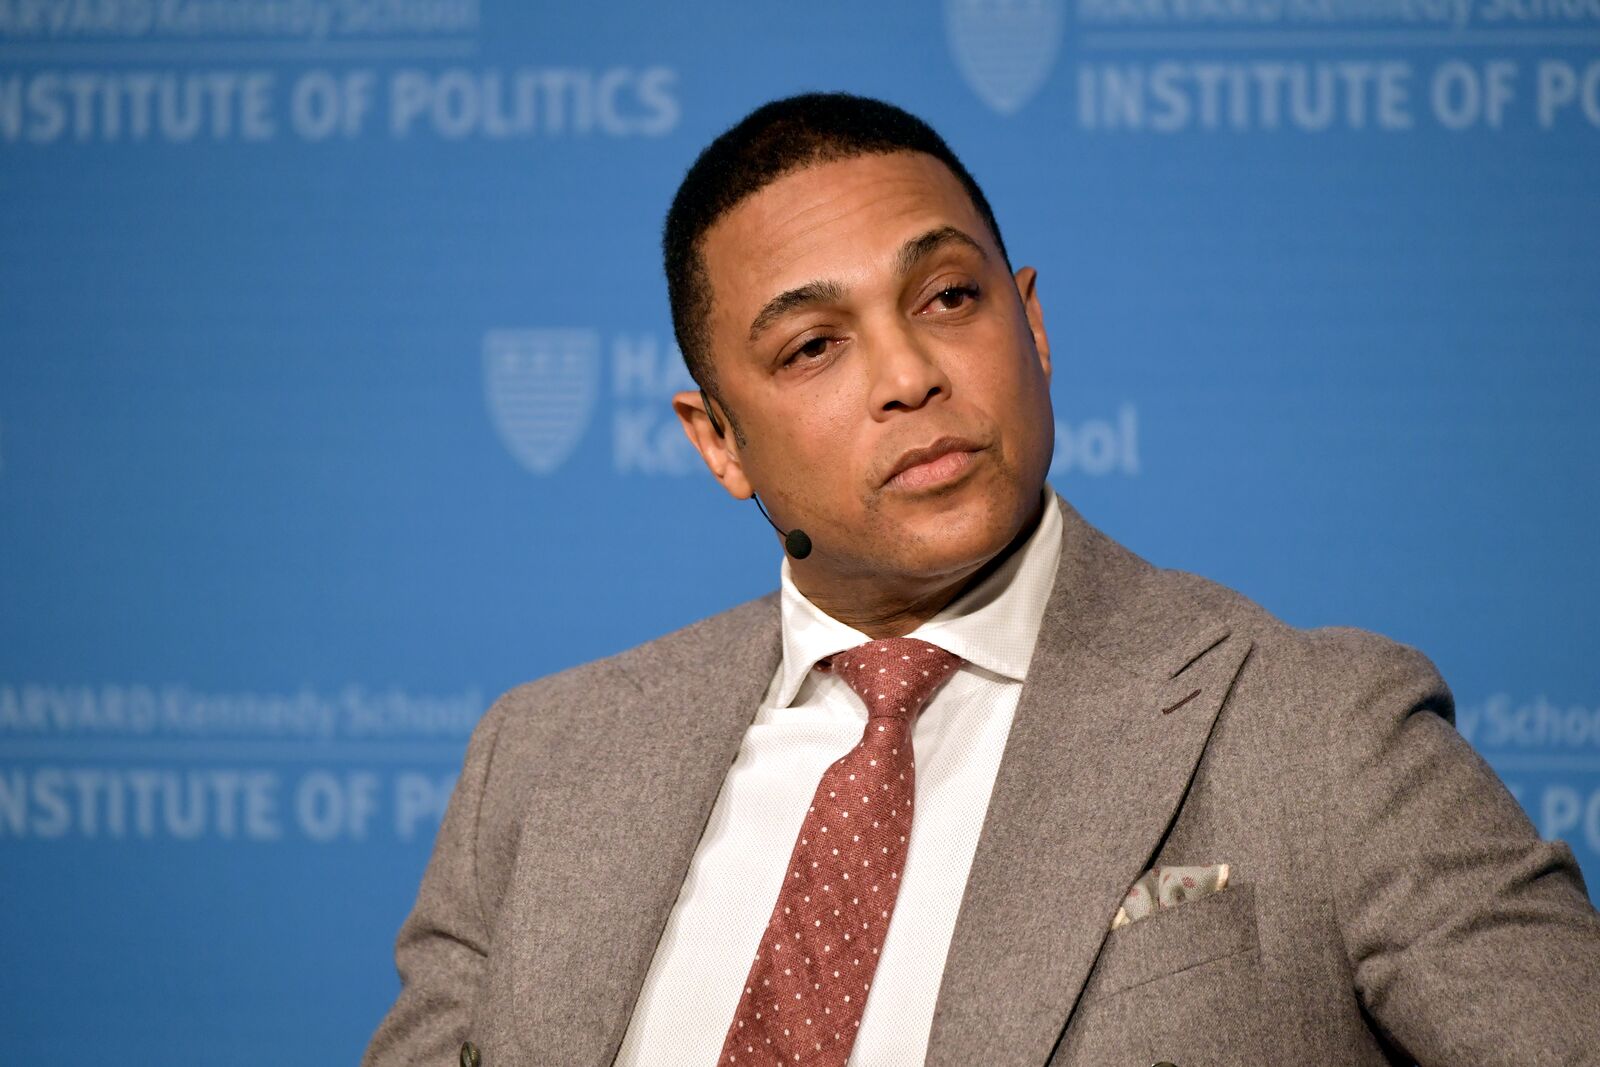 CNN's Don Lemon speaks at Harvard University Kennedy School of Government Institute of Politics in a program titled "Race, Media and Politics" on February 22, 2019 | Photo: Getty Images